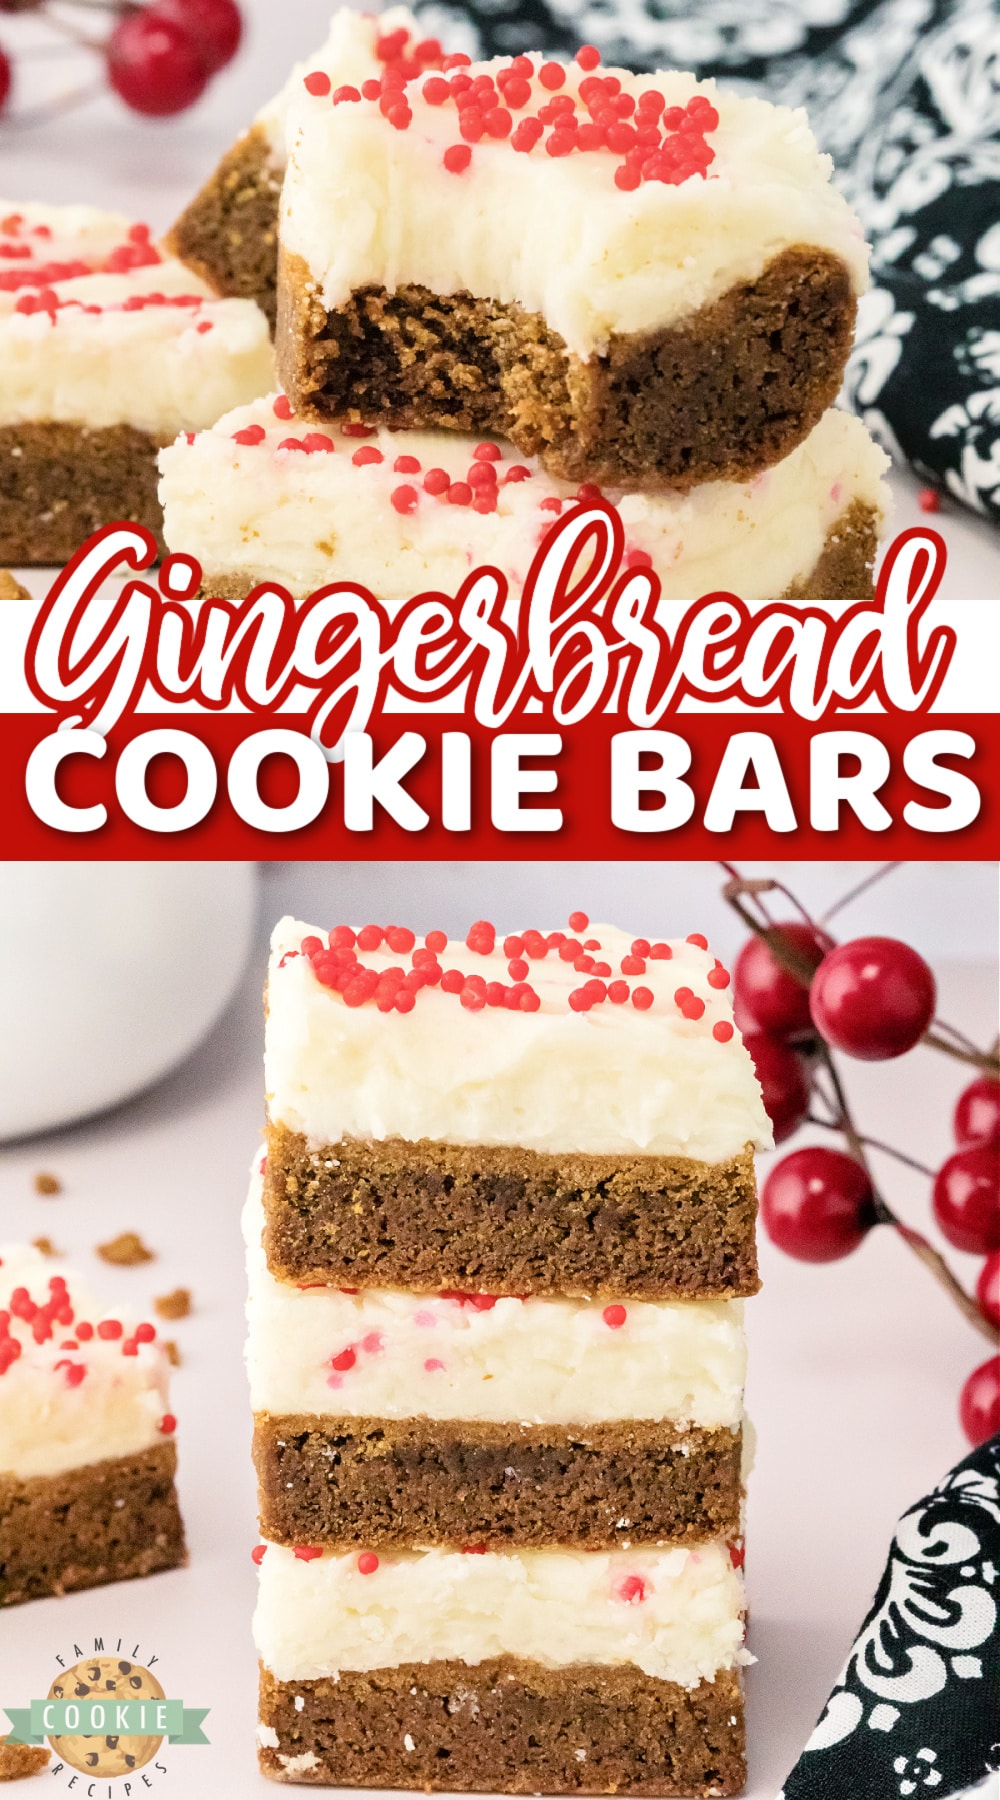 Gingerbread Cookie Bars are soft, thick, perfectly spiced and easy to make when you don't have time to scoop out individual cookies. Topped with cream cheese frosting, these gingerbread cookie bars are a big hit during the holiday season!  